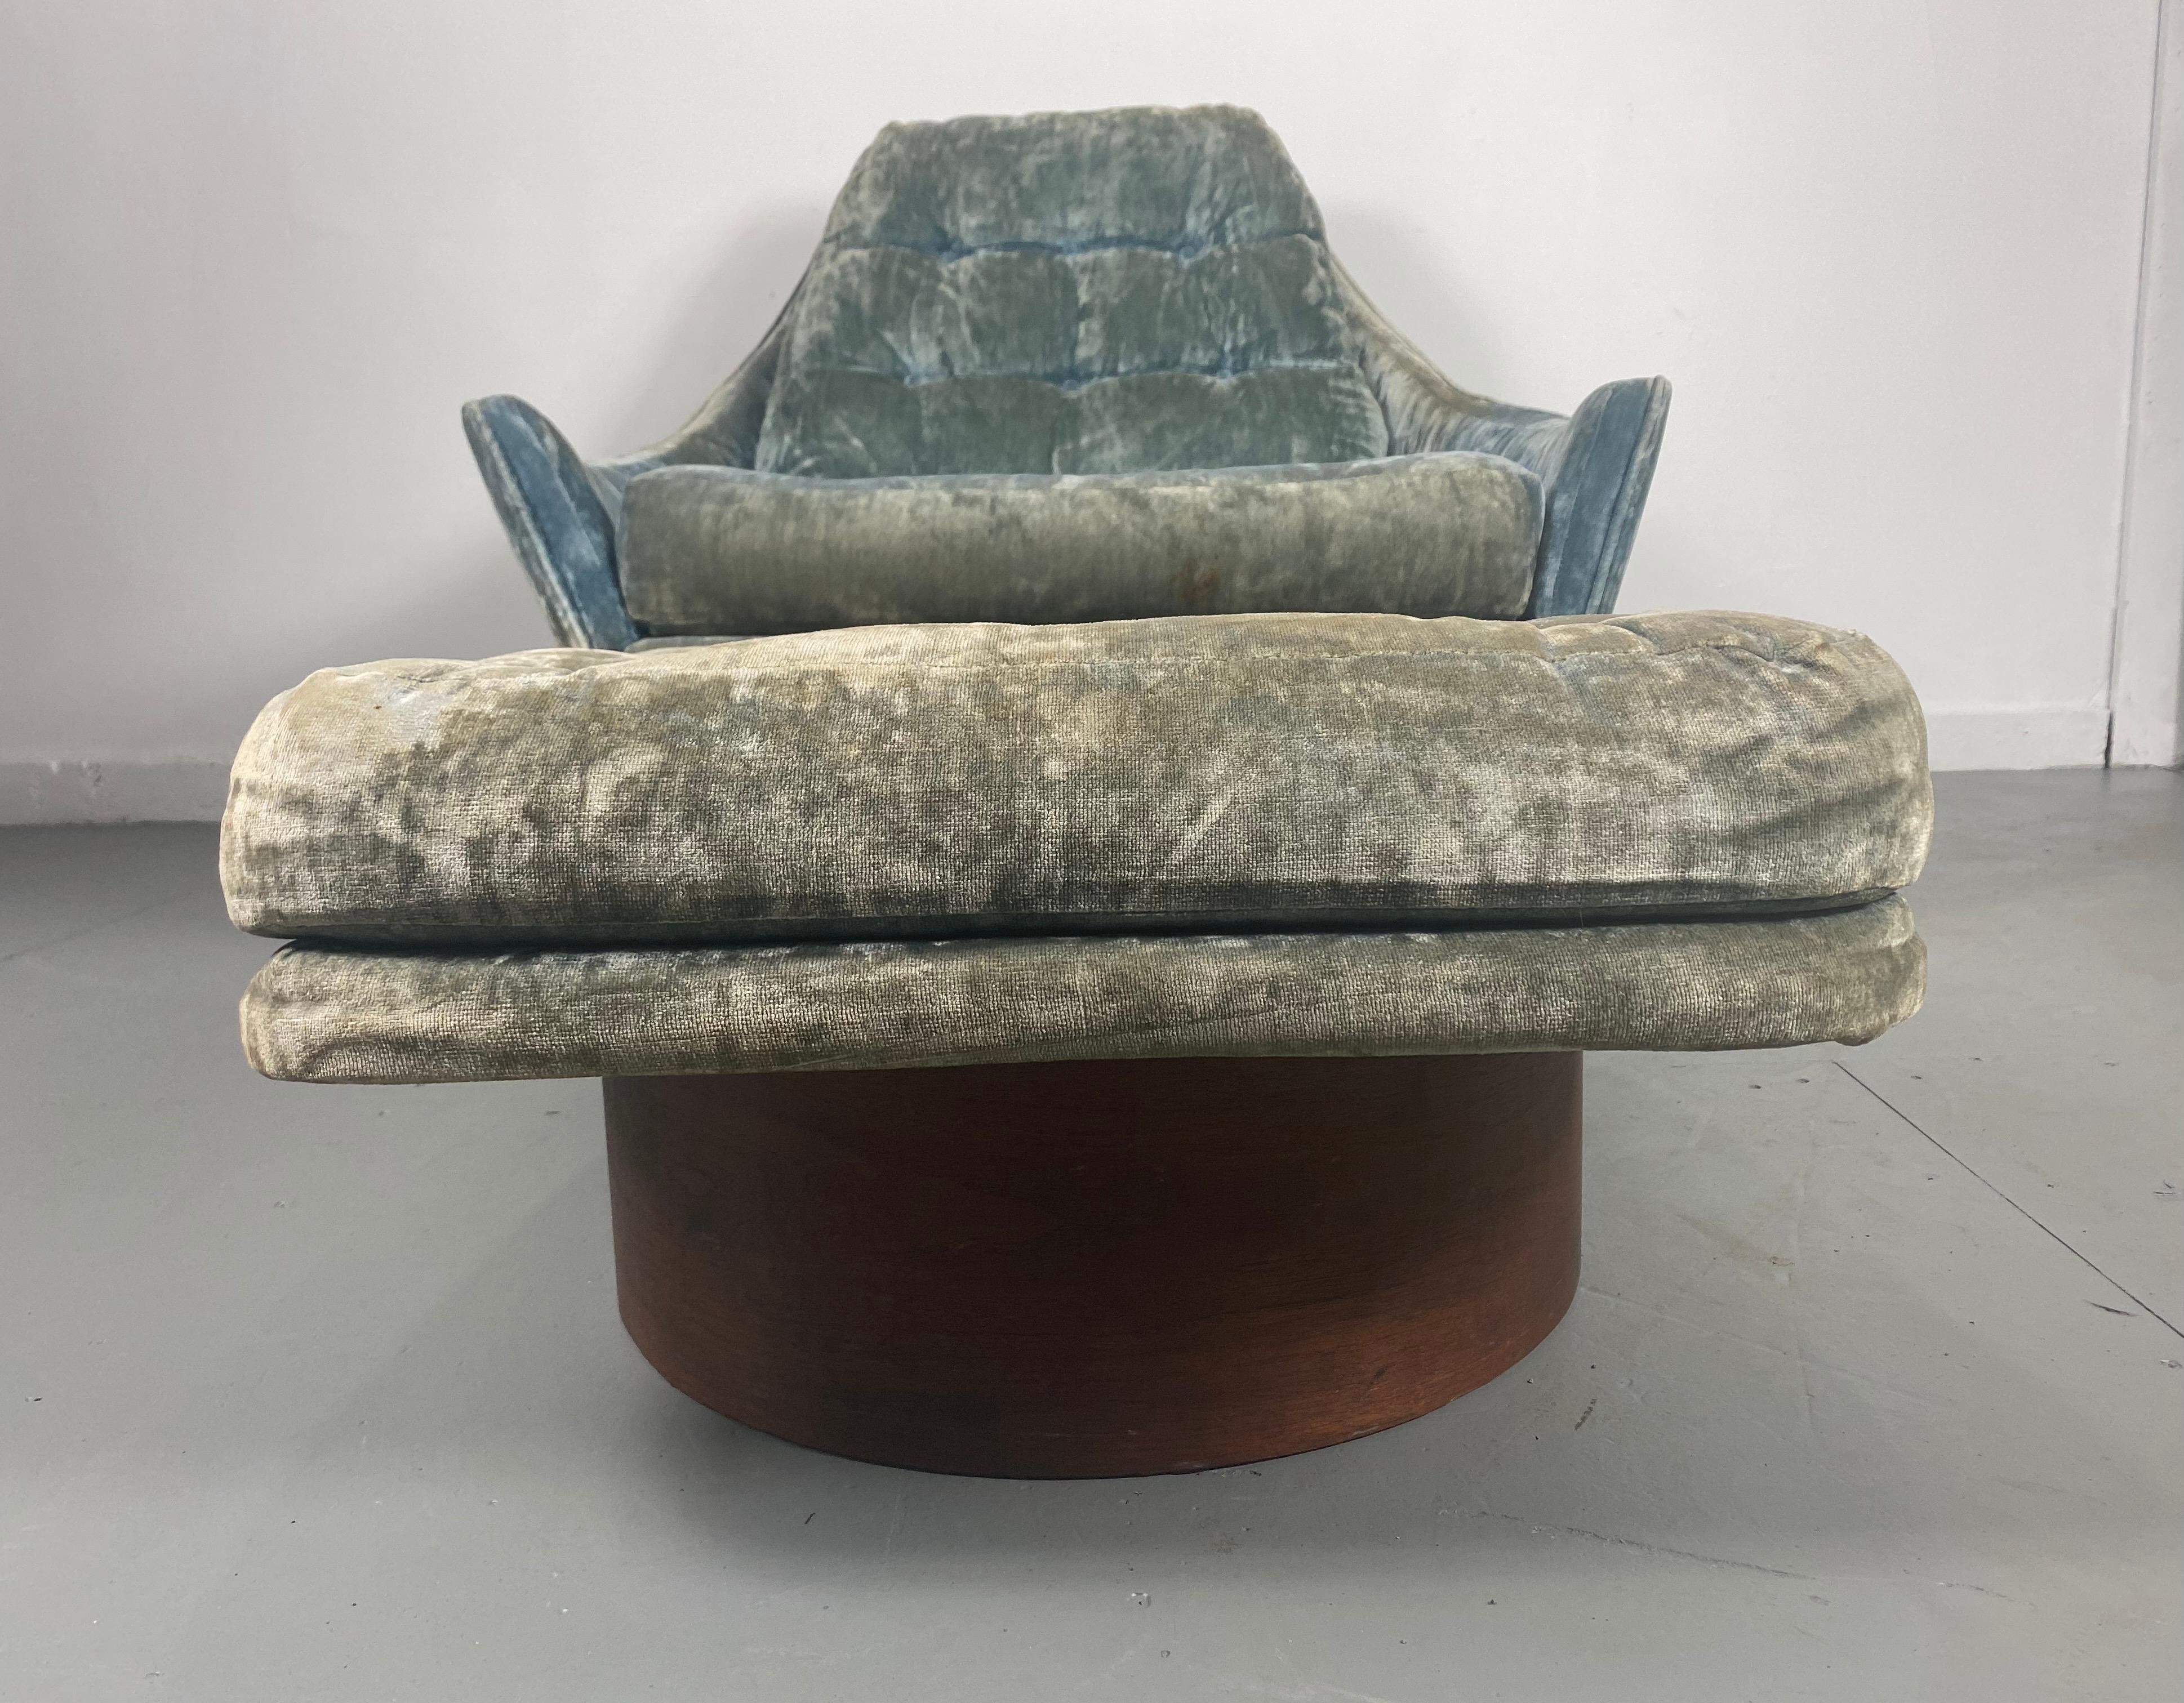 Space age sculptural lounge chair and ottoman attributed to Adrian Pearsall Classic, 1960s, unusual wide pod design, extremely comfortable, retains original aqua-blu crushed velvet fabric, usable but faded, would be amazing reupholstered, plywood